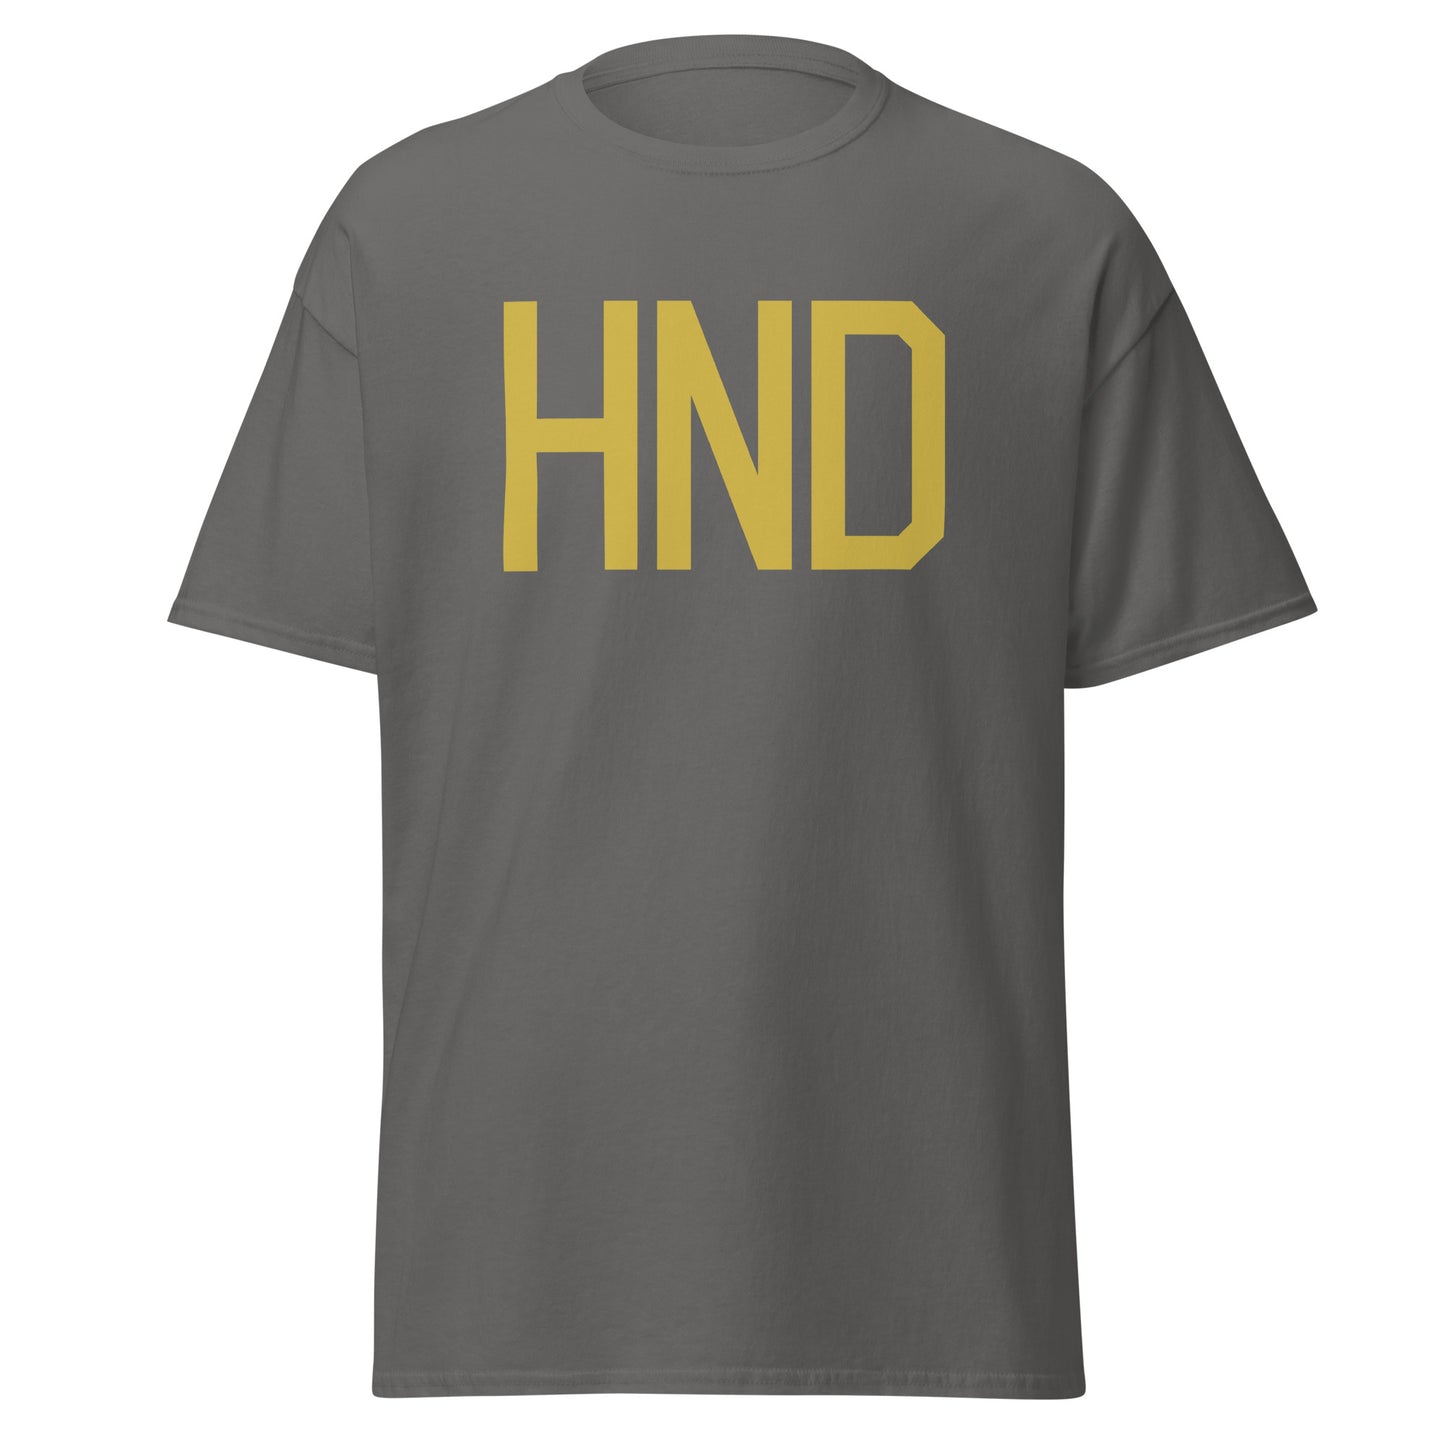 Aviation Enthusiast Men's Tee - Old Gold Graphic • HND Tokyo • YHM Designs - Image 05